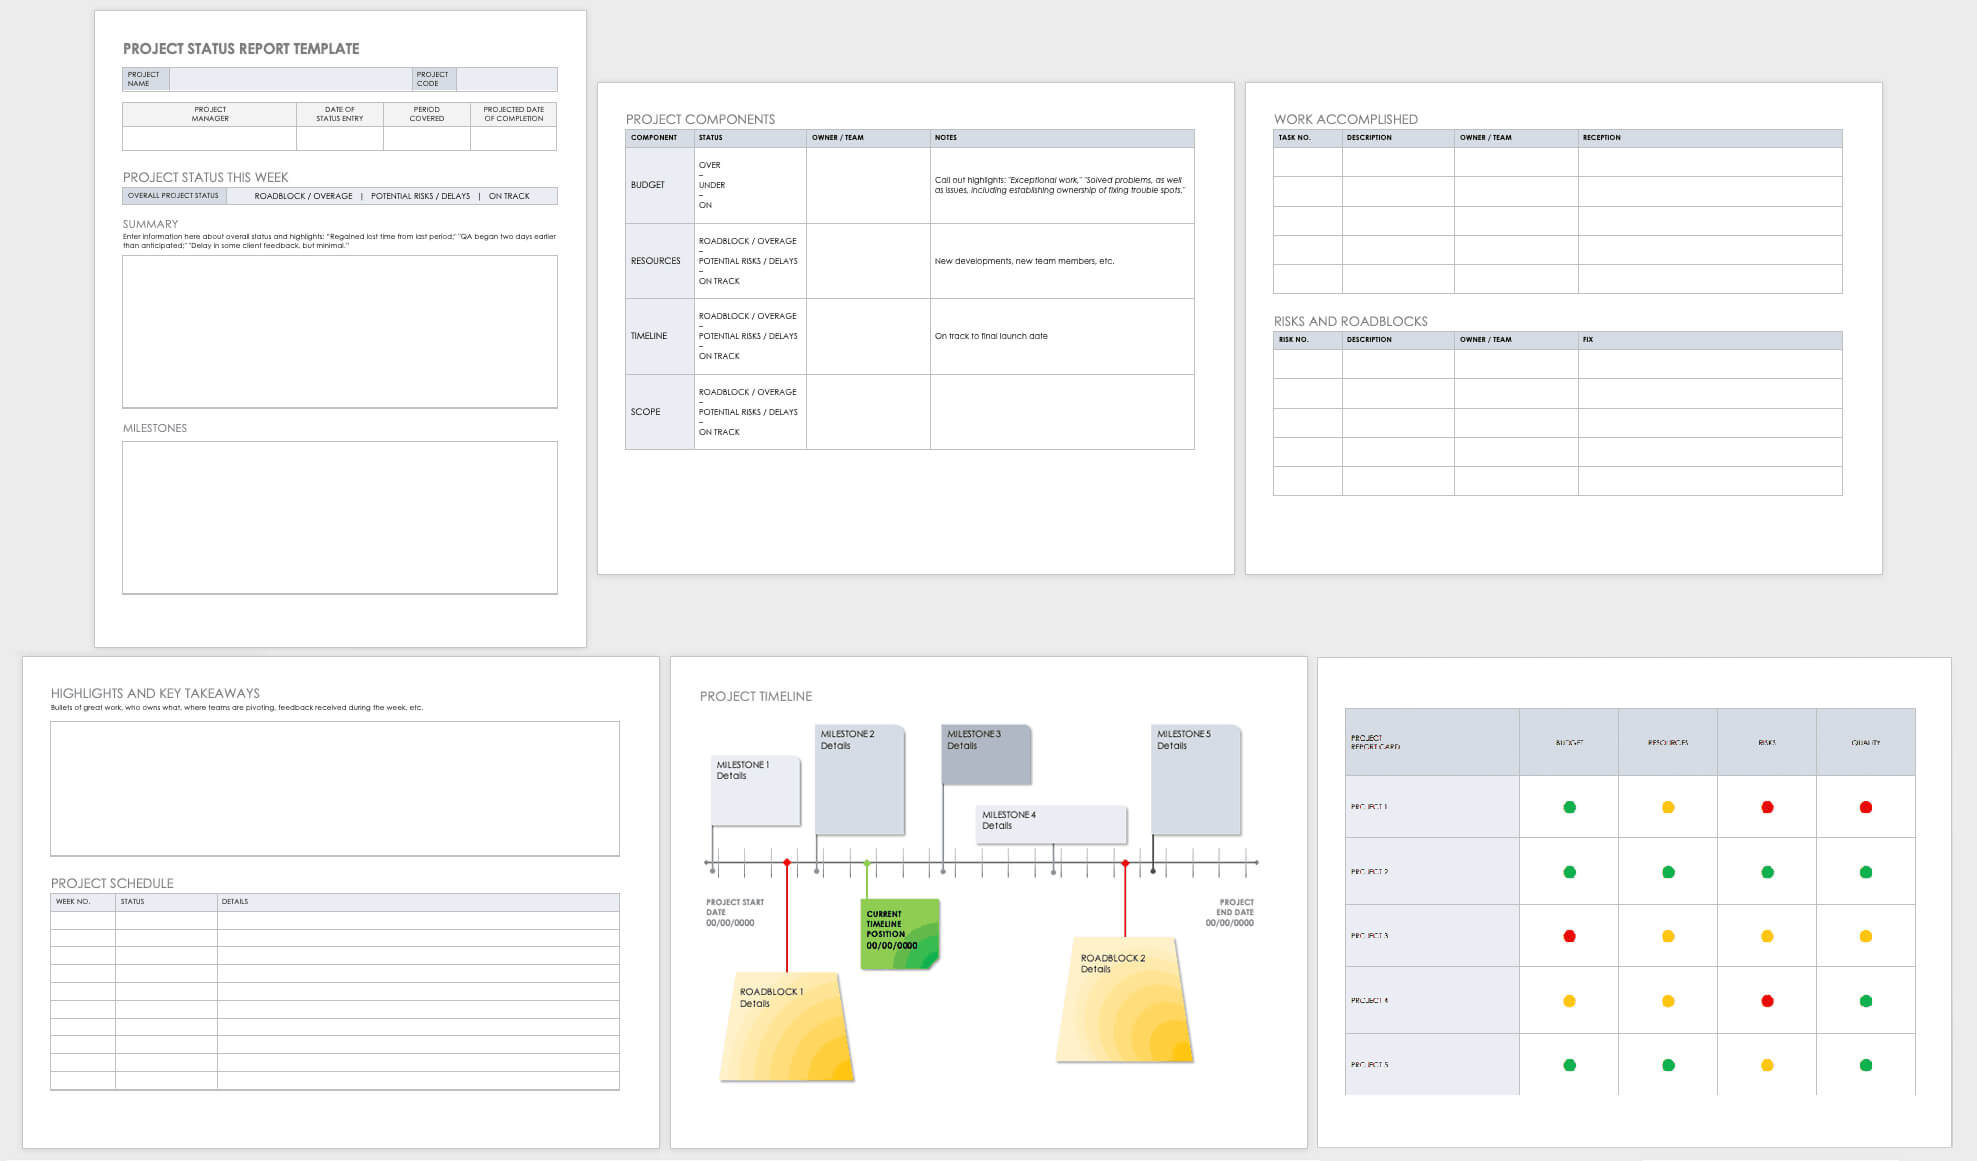 Free Project Report Templates | Smartsheet In Progress Report Template For Construction Project